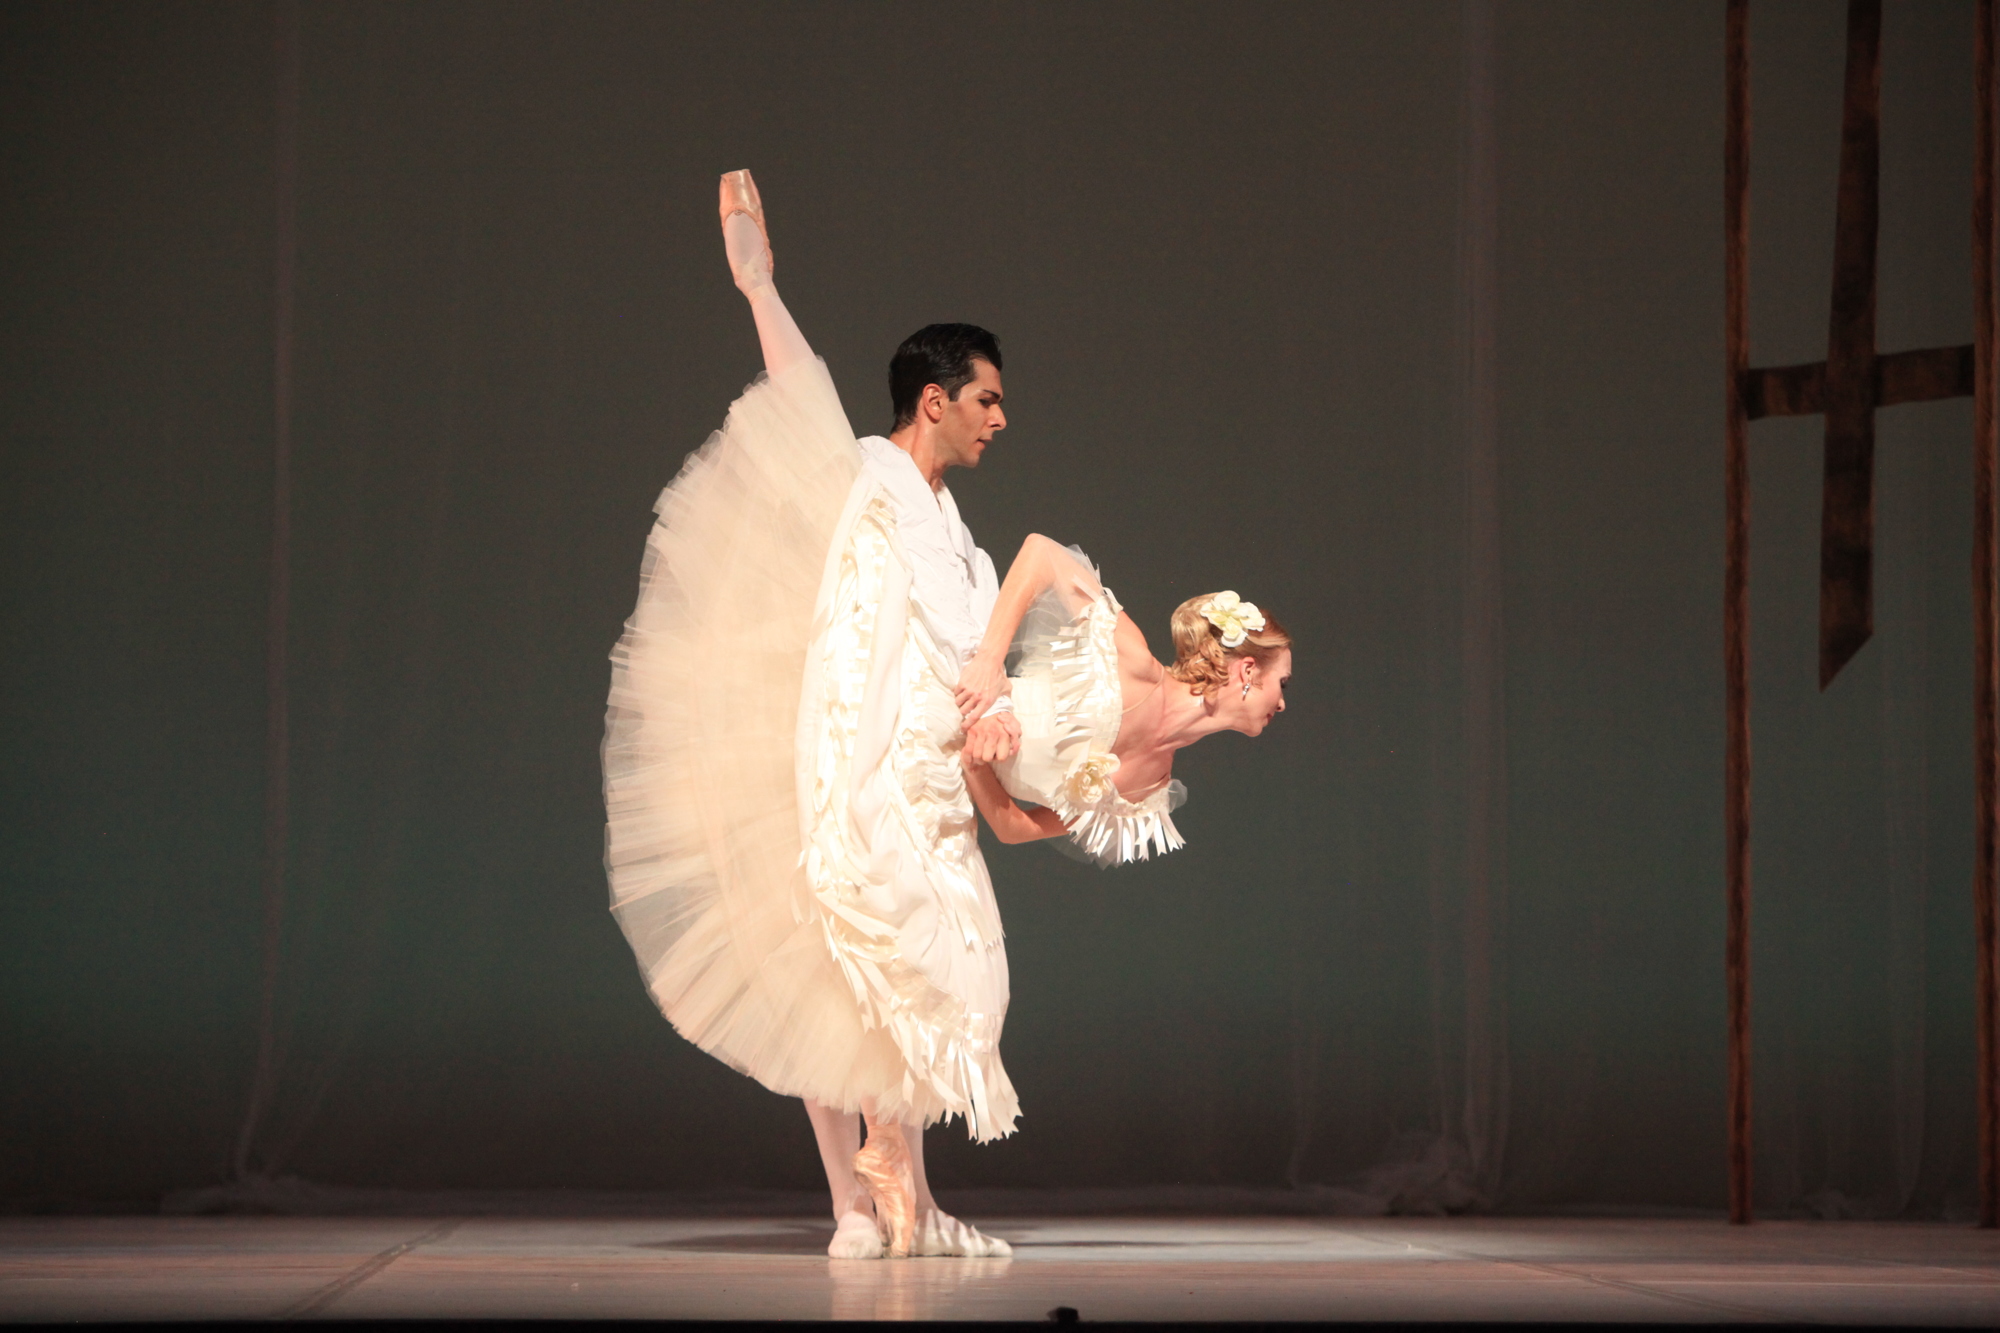 Ricardo Graziano and Victoria Hulland perform Sir Frederick Ashton’s “Marguerite and Armand.” Photo by Frank Atura.